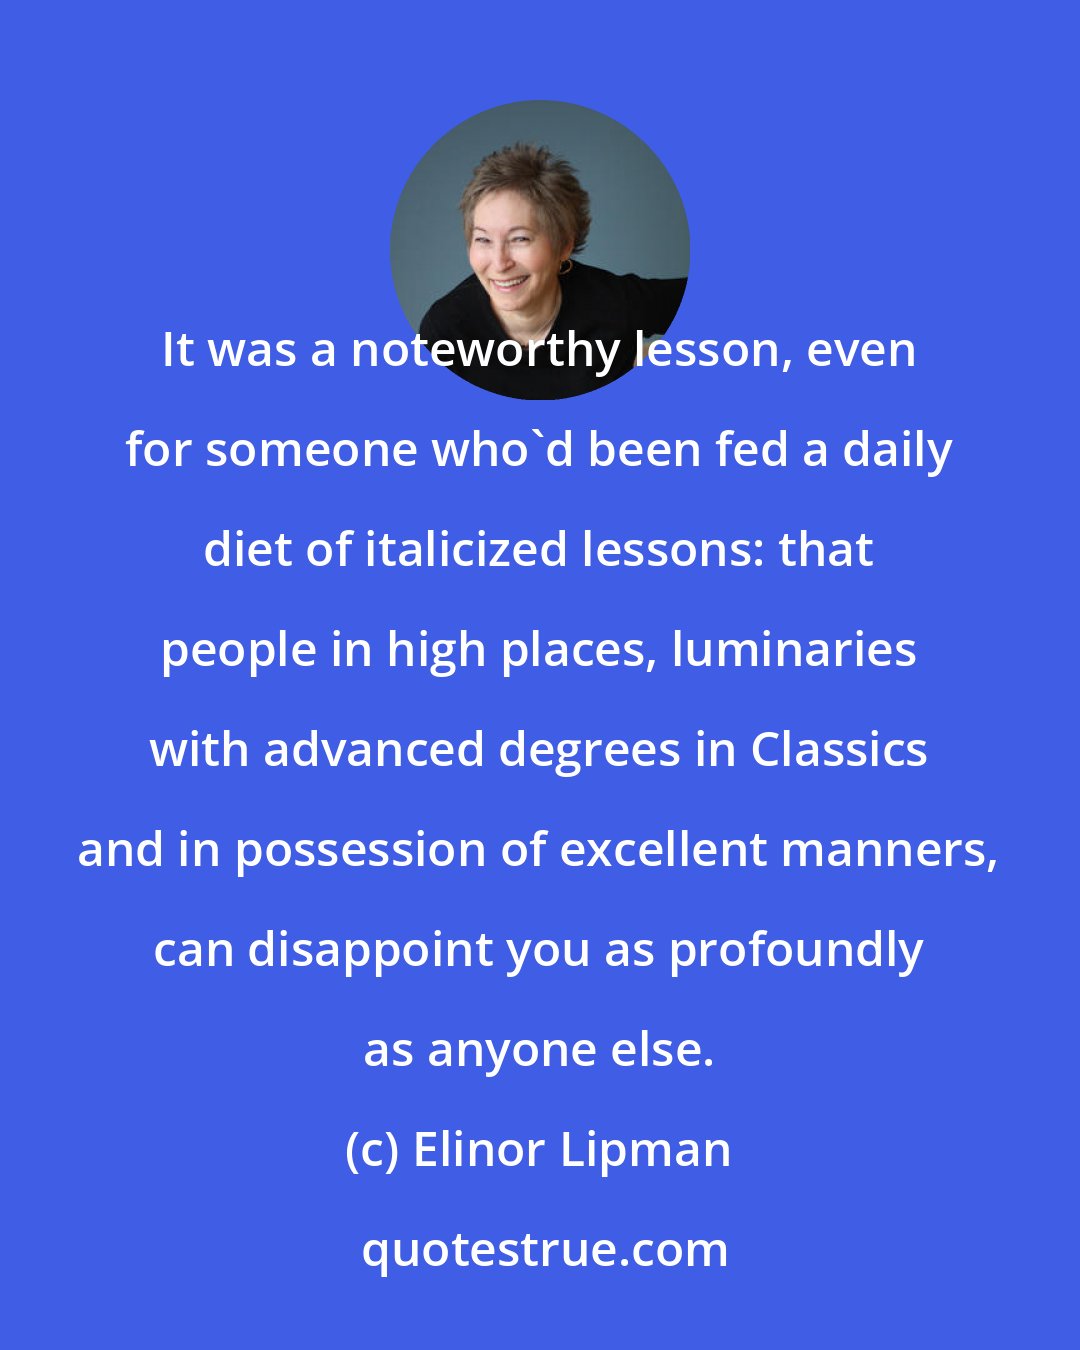 Elinor Lipman: It was a noteworthy lesson, even for someone who'd been fed a daily diet of italicized lessons: that people in high places, luminaries with advanced degrees in Classics and in possession of excellent manners, can disappoint you as profoundly as anyone else.